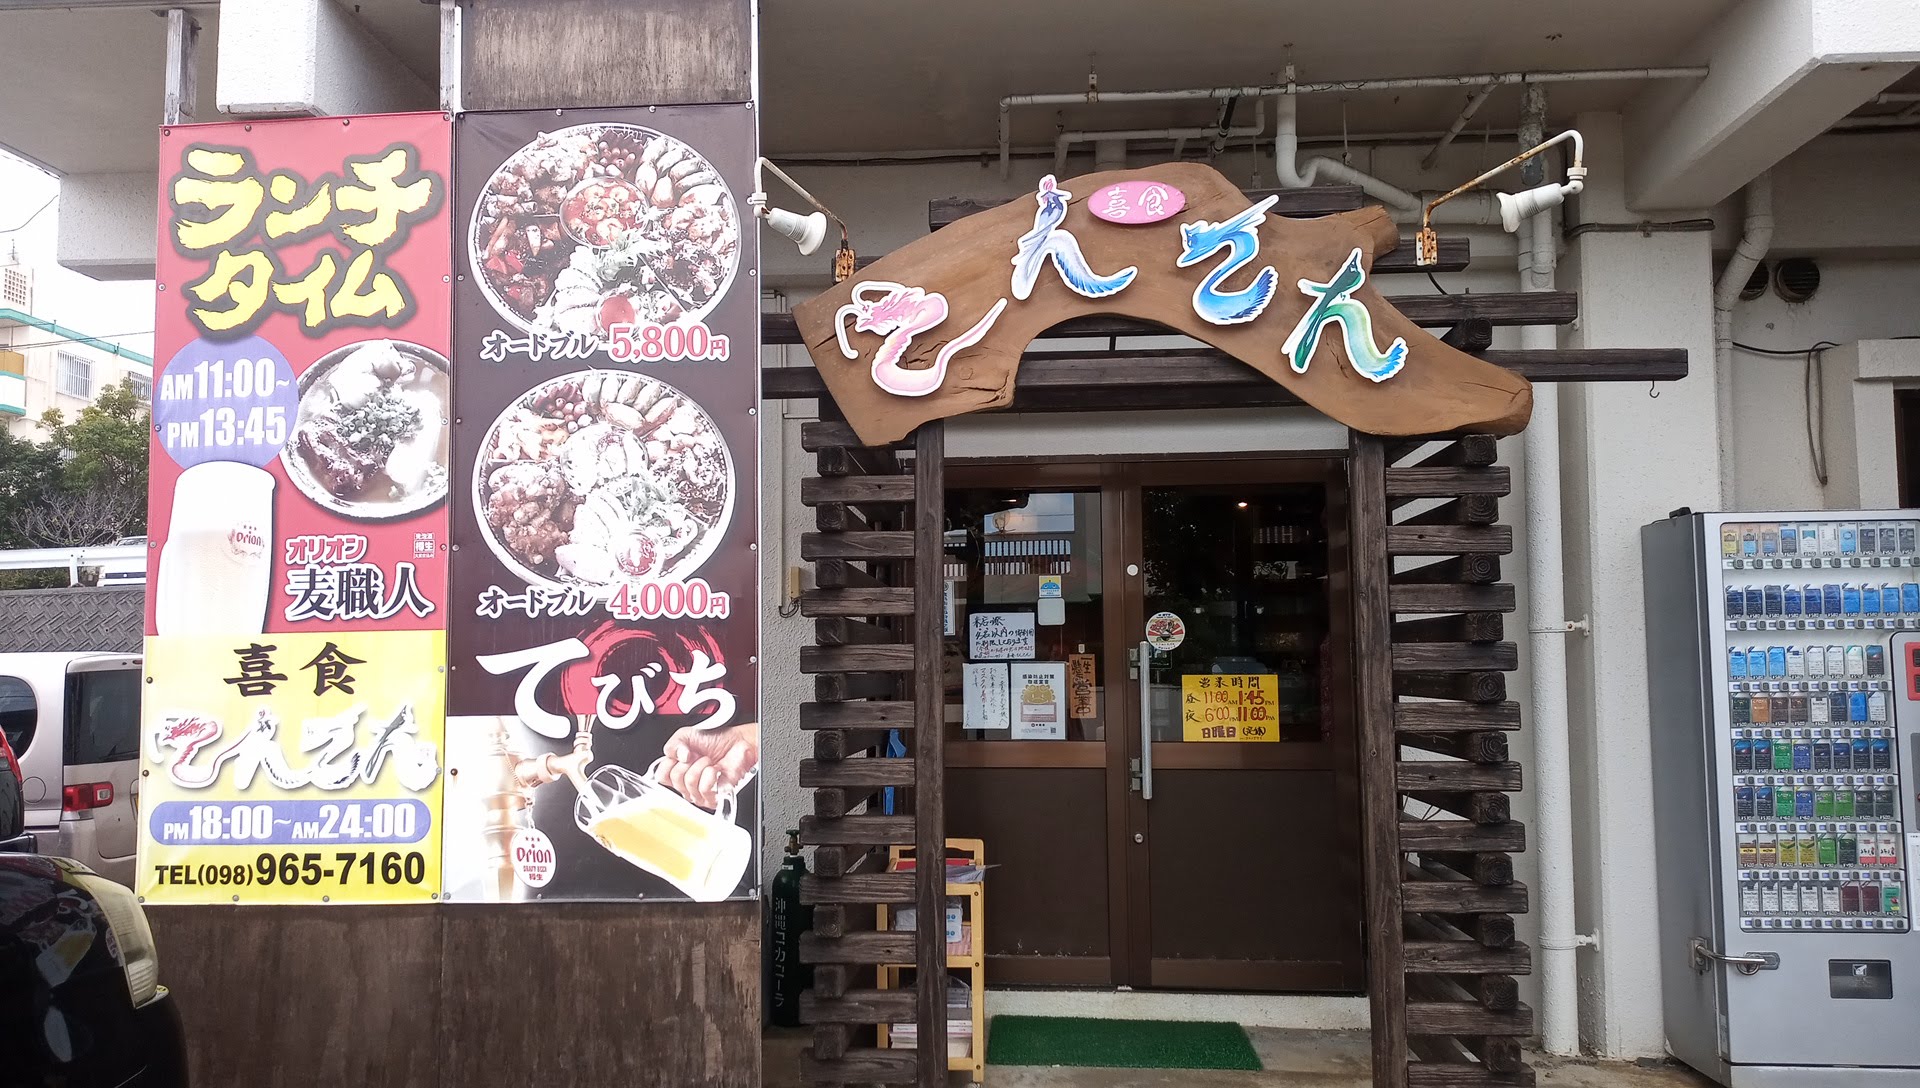 Kishoku Tenten, a restaurant in Uruma City famous for its super-sized chicken cutlets.